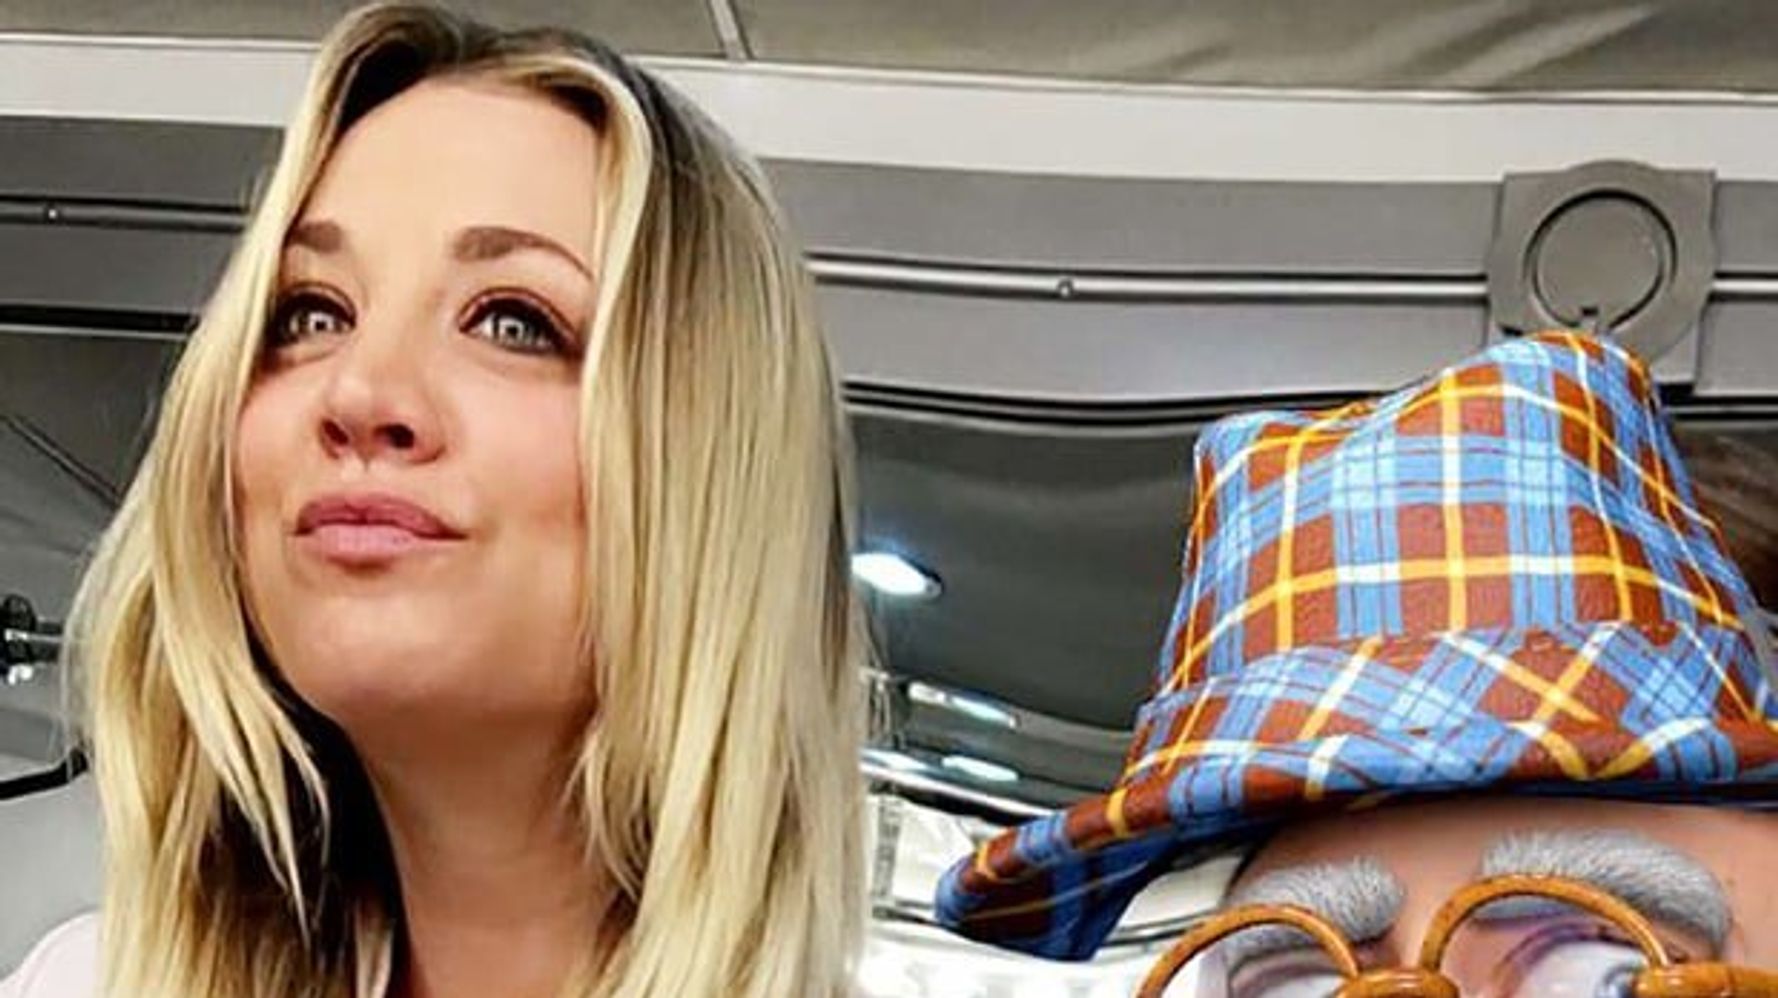 Kaley Cuoco Bares Her Breast In Goofy Snapchat Photo.